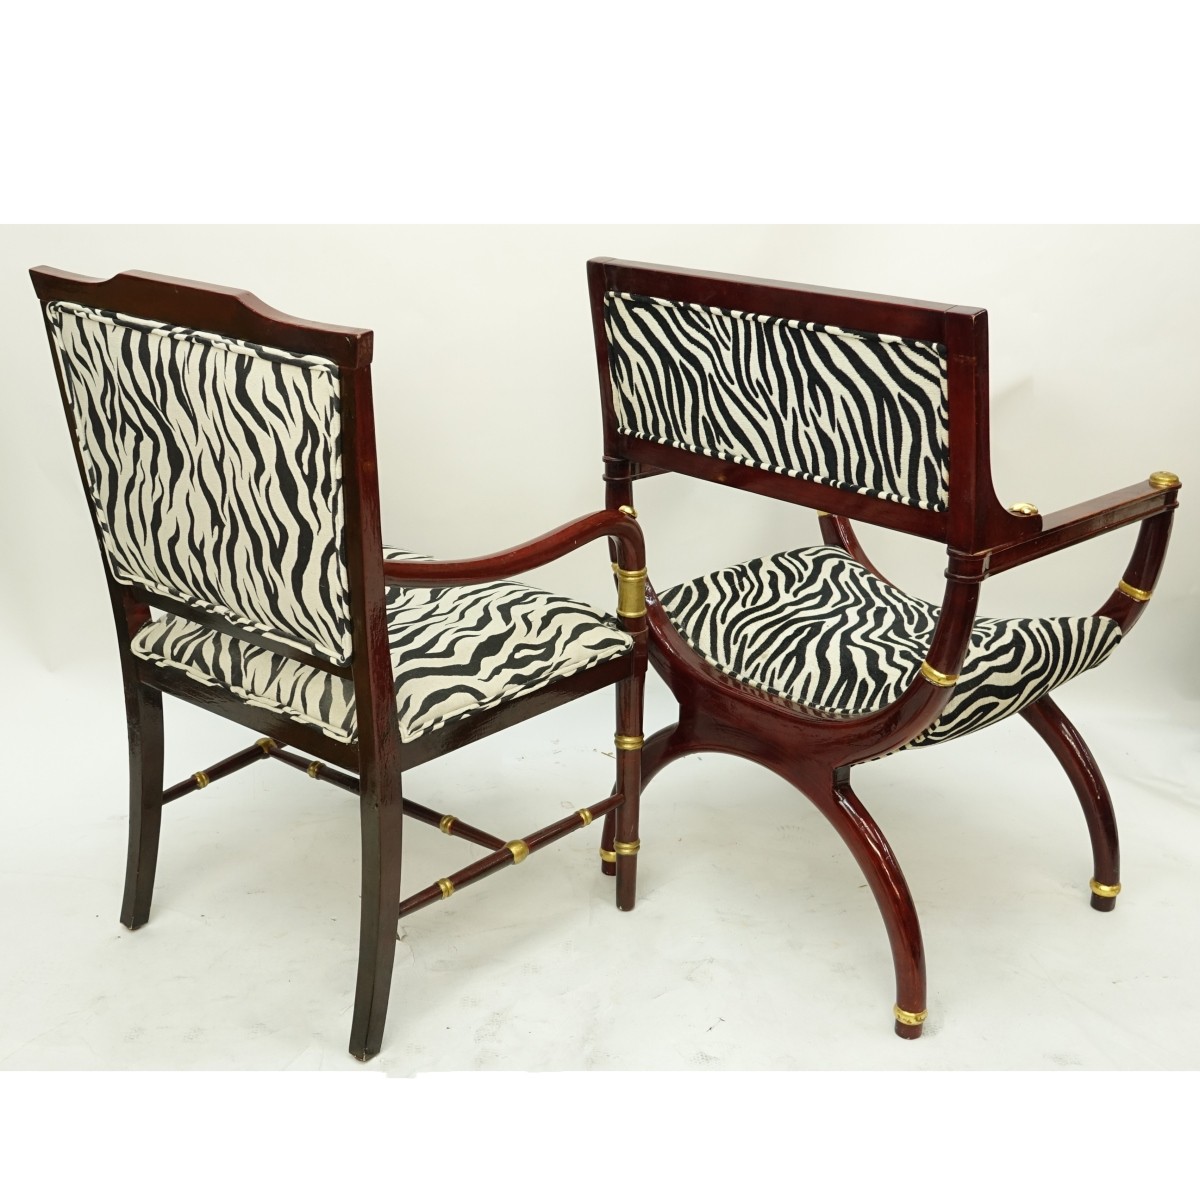 Two Neoclassical Style Chairs